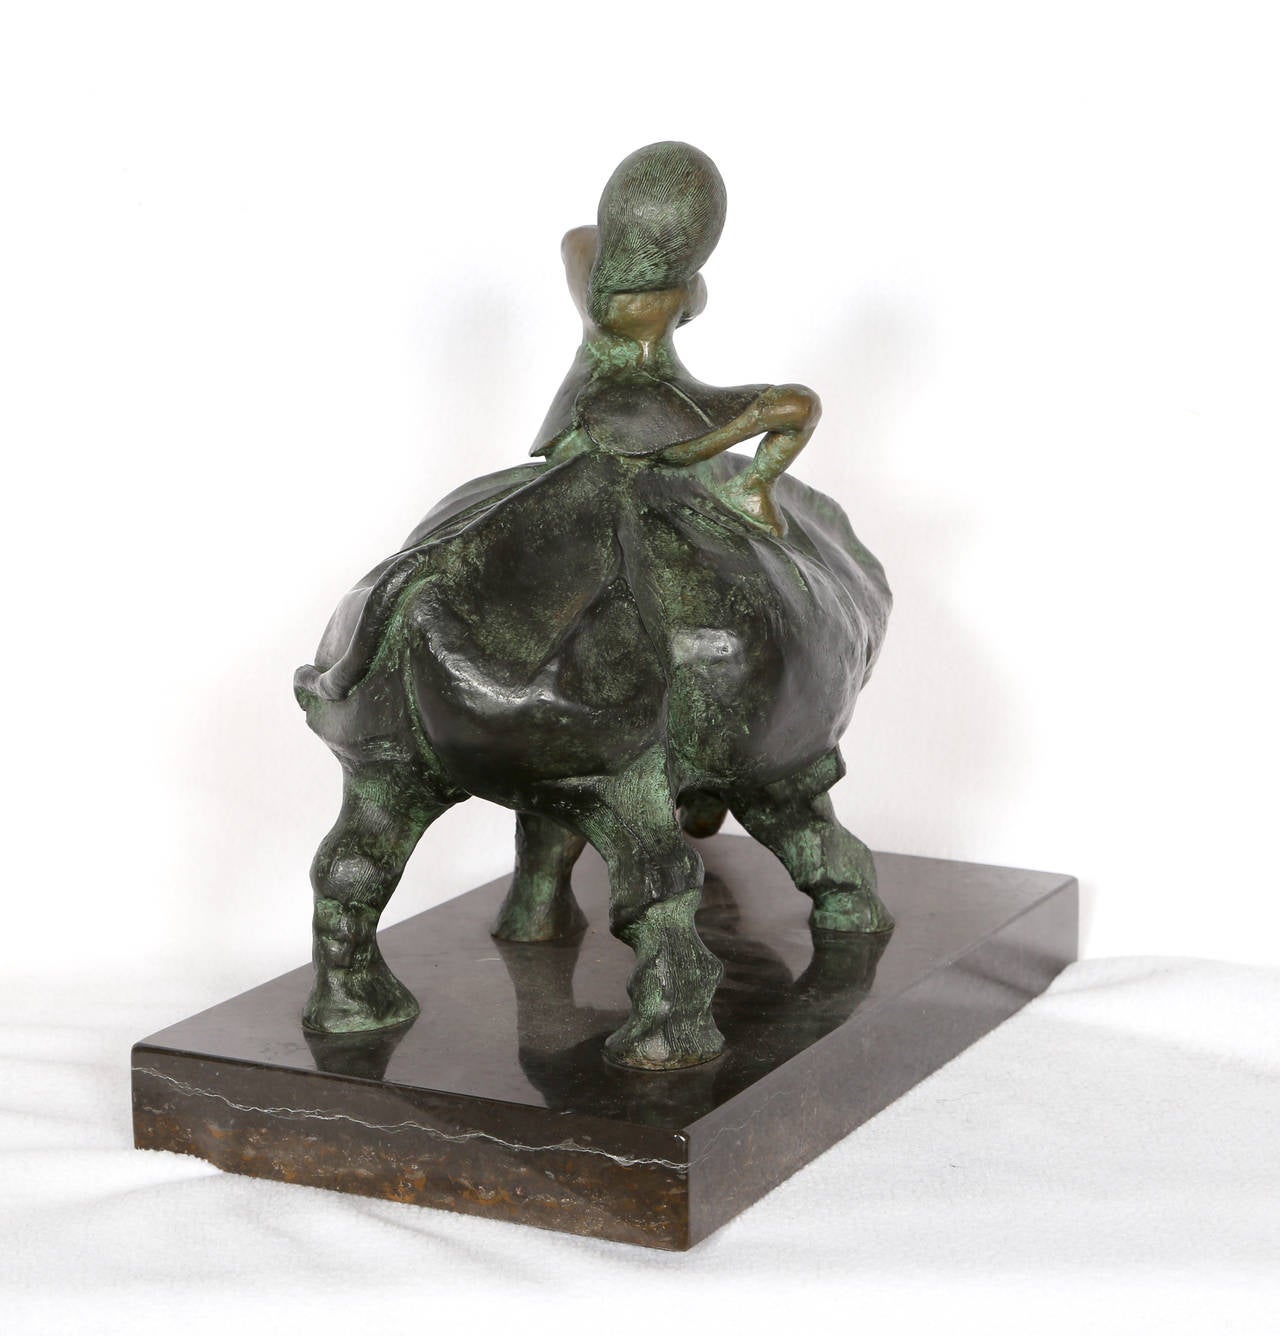 Artist: Graciela Rodo Boulanger, Bolivian (1935 - )
Title: Meditation
Year: 1986
Medium: Bronze Sculpture, signature and numbering inscribed
Edition: 1/99
Size: 12.5 x 12.5 x 8 in. (31.75 x 31.75 x 20.32 cm)